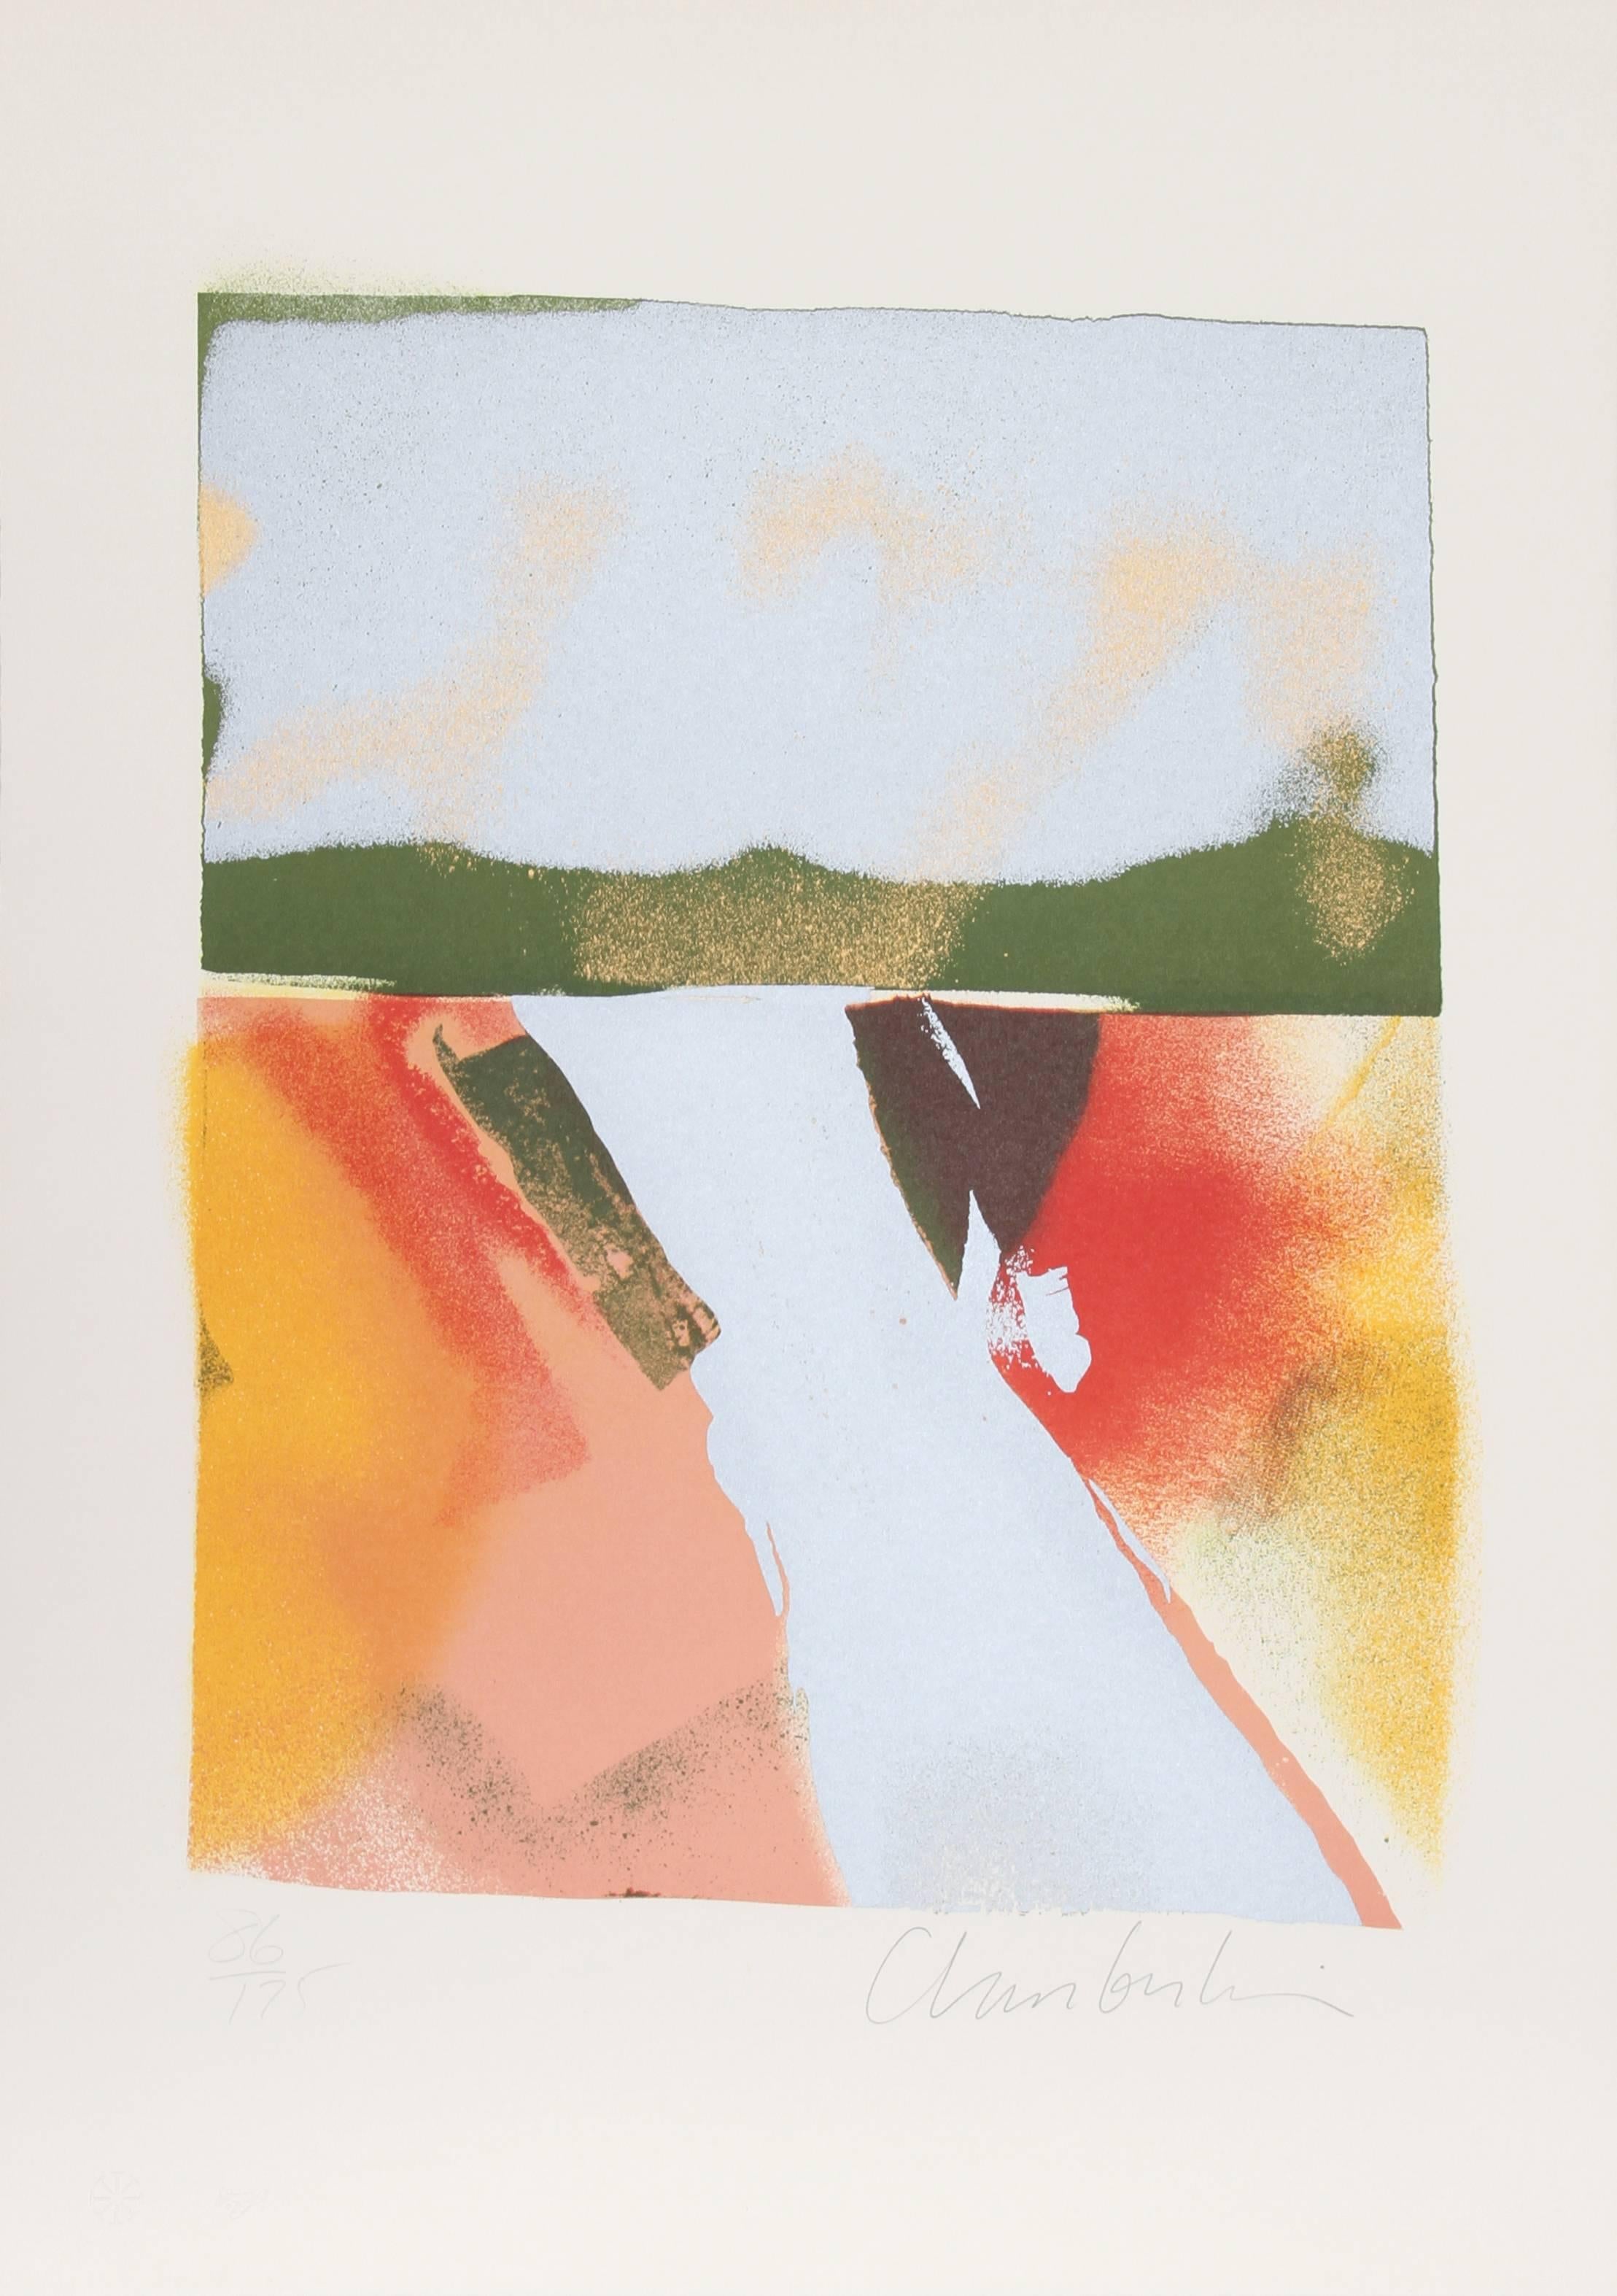 Artist: John Chamberlain
Title: Flashback VII
Year: 1981
Medium: Lithograph, signed and numbered in pencil 
Edition: 175
Paper Size: 28 x 20 inches 